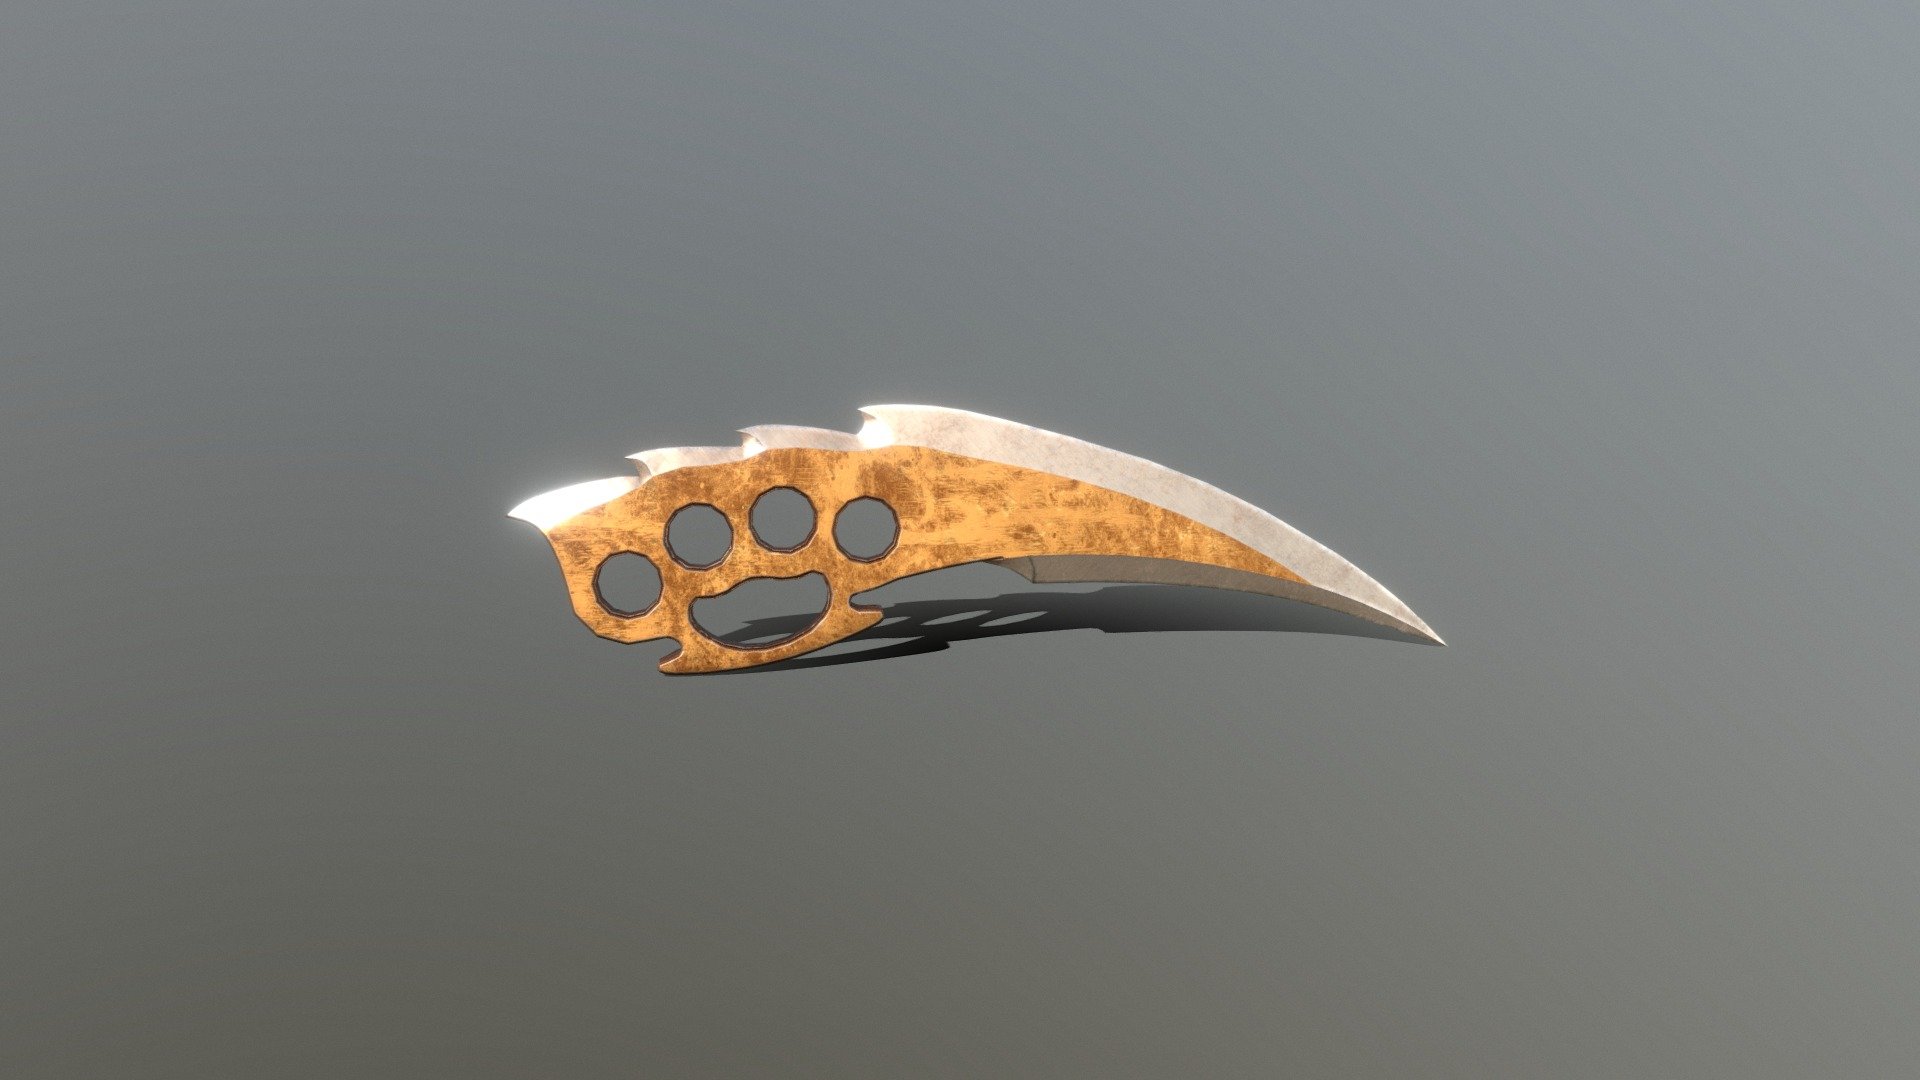 Feel free to ask for any support

Email : hardideaent@gmail.com
FB : https://www.facebook.com/HardIdeaEntertainmentStudio/
Twitter : https://twitter.com/hardideaent - HIE Dagger D180212 - Buy Royalty Free 3D model by HardIdea (@s86b16) 3d model